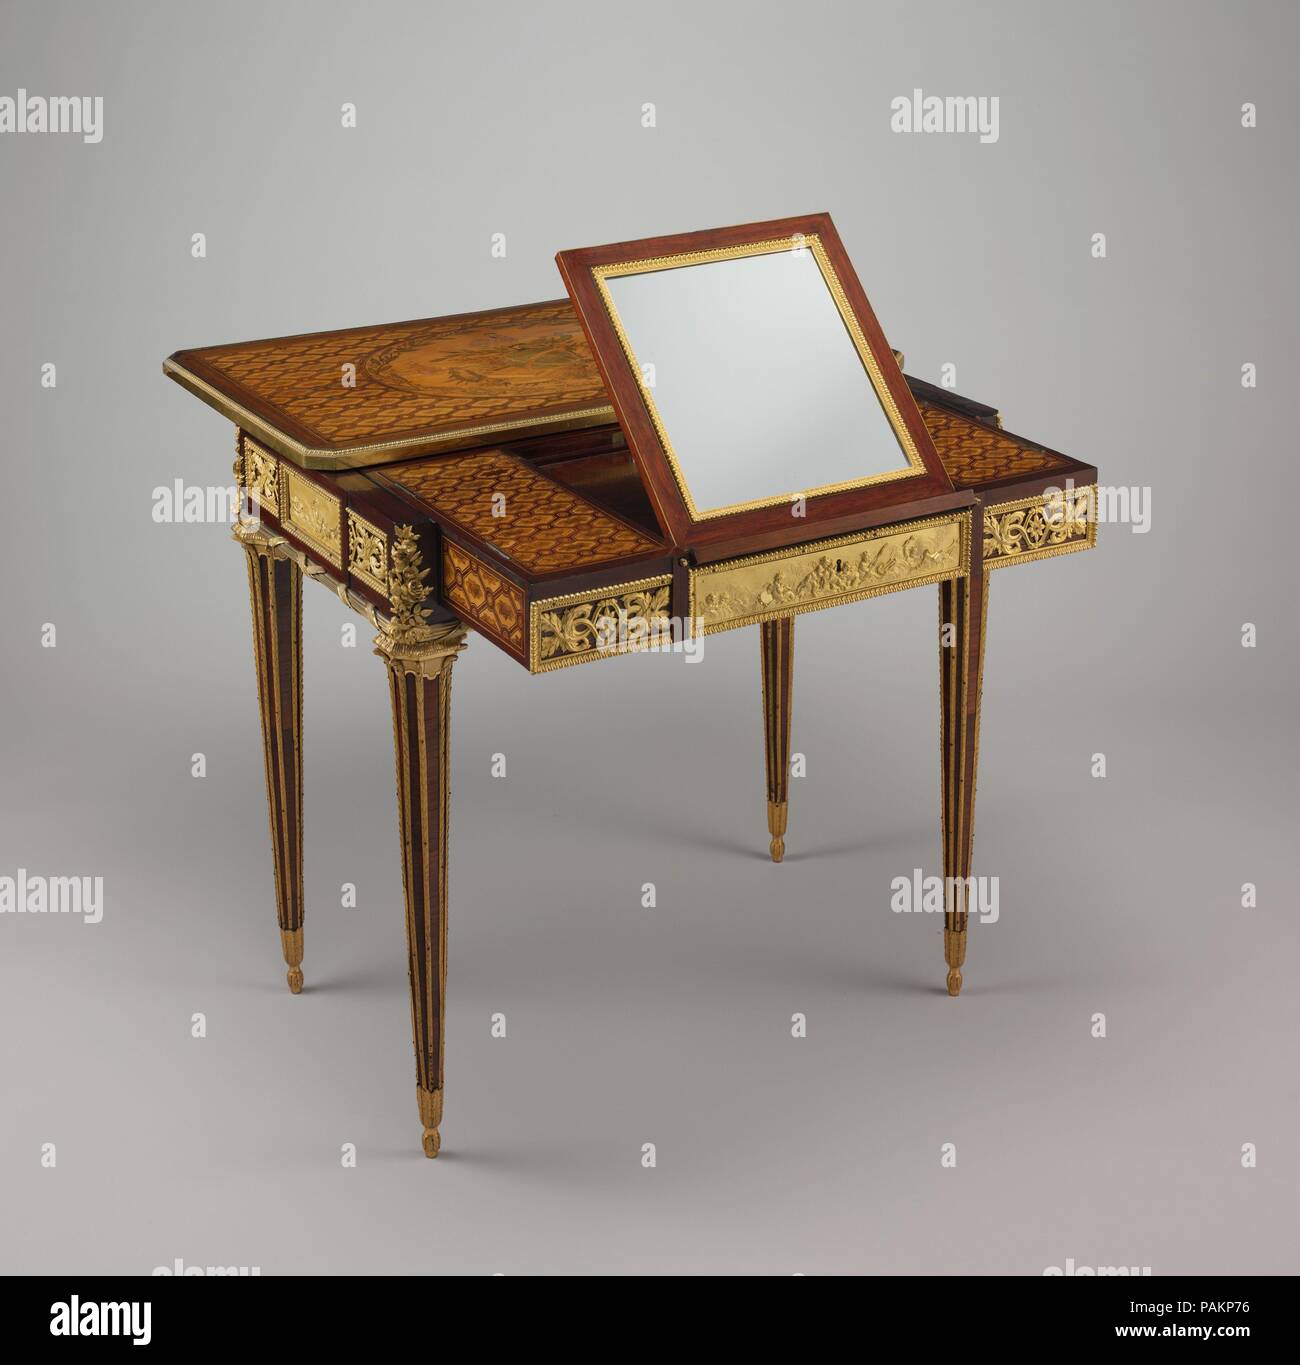 Mechanical table. Culture: French, Paris. Dimensions: Overall: 28 1/2 × 30  3/4 × 19 in. (72.4 × 78.1 × 48.3 cm). Maker: Jean Henri Riesener (French,  Gladbeck, North Rhine-Westphalia 1734-1806 Paris). Date: